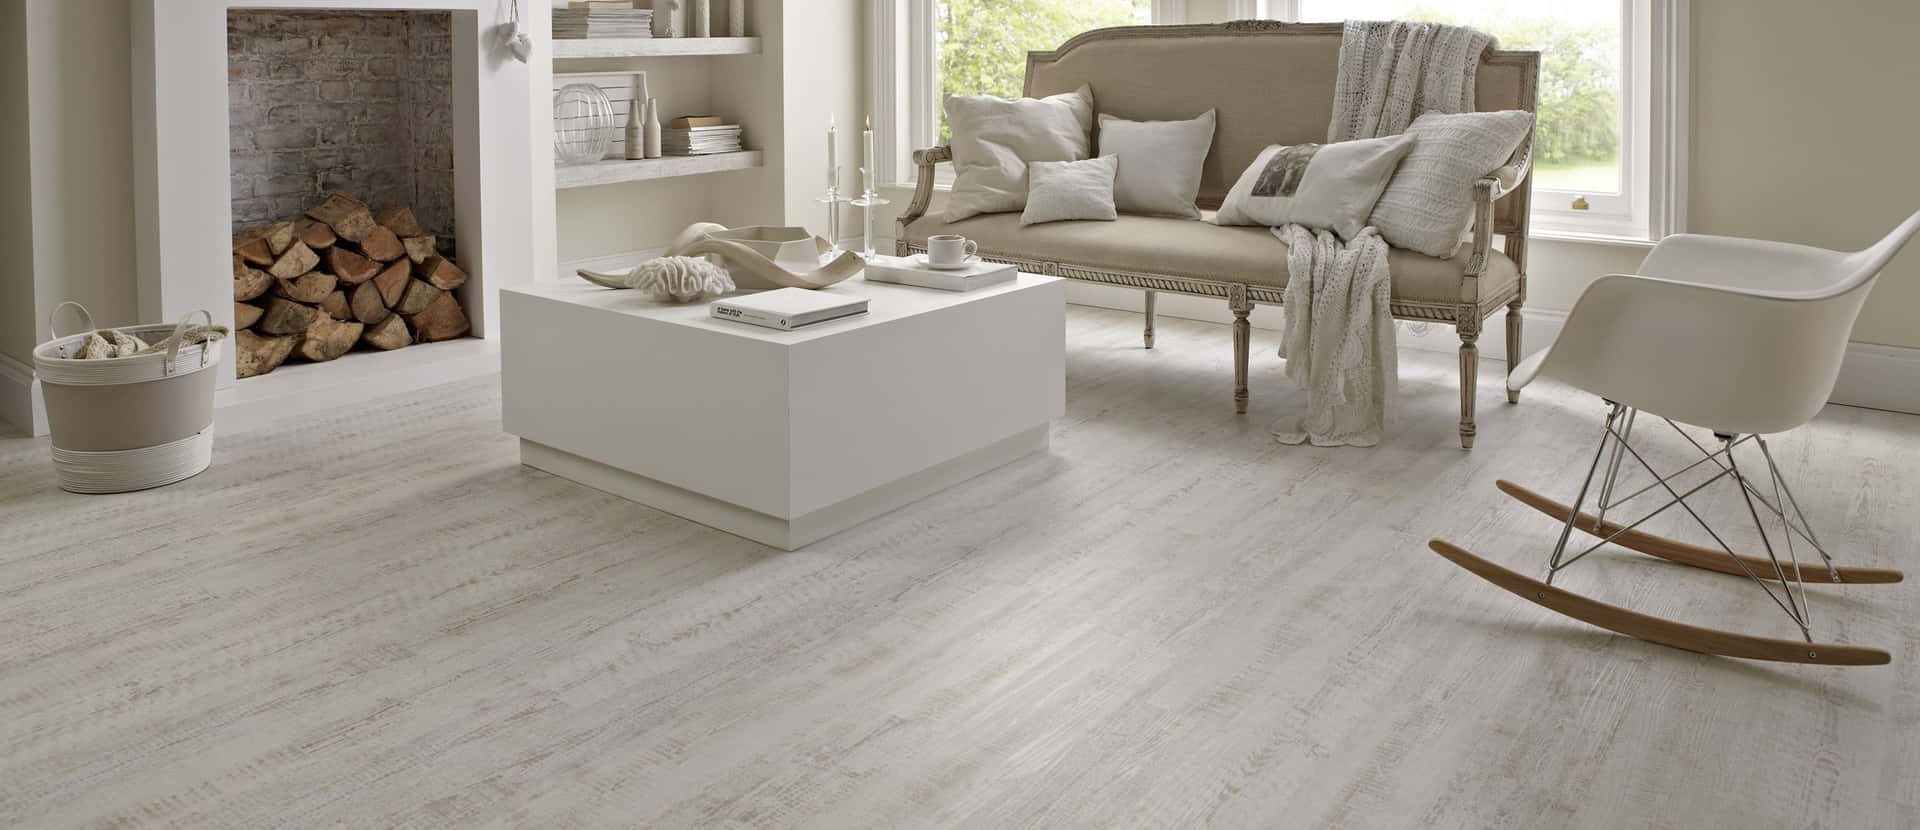 Add a timeless look to your space with wood flooring